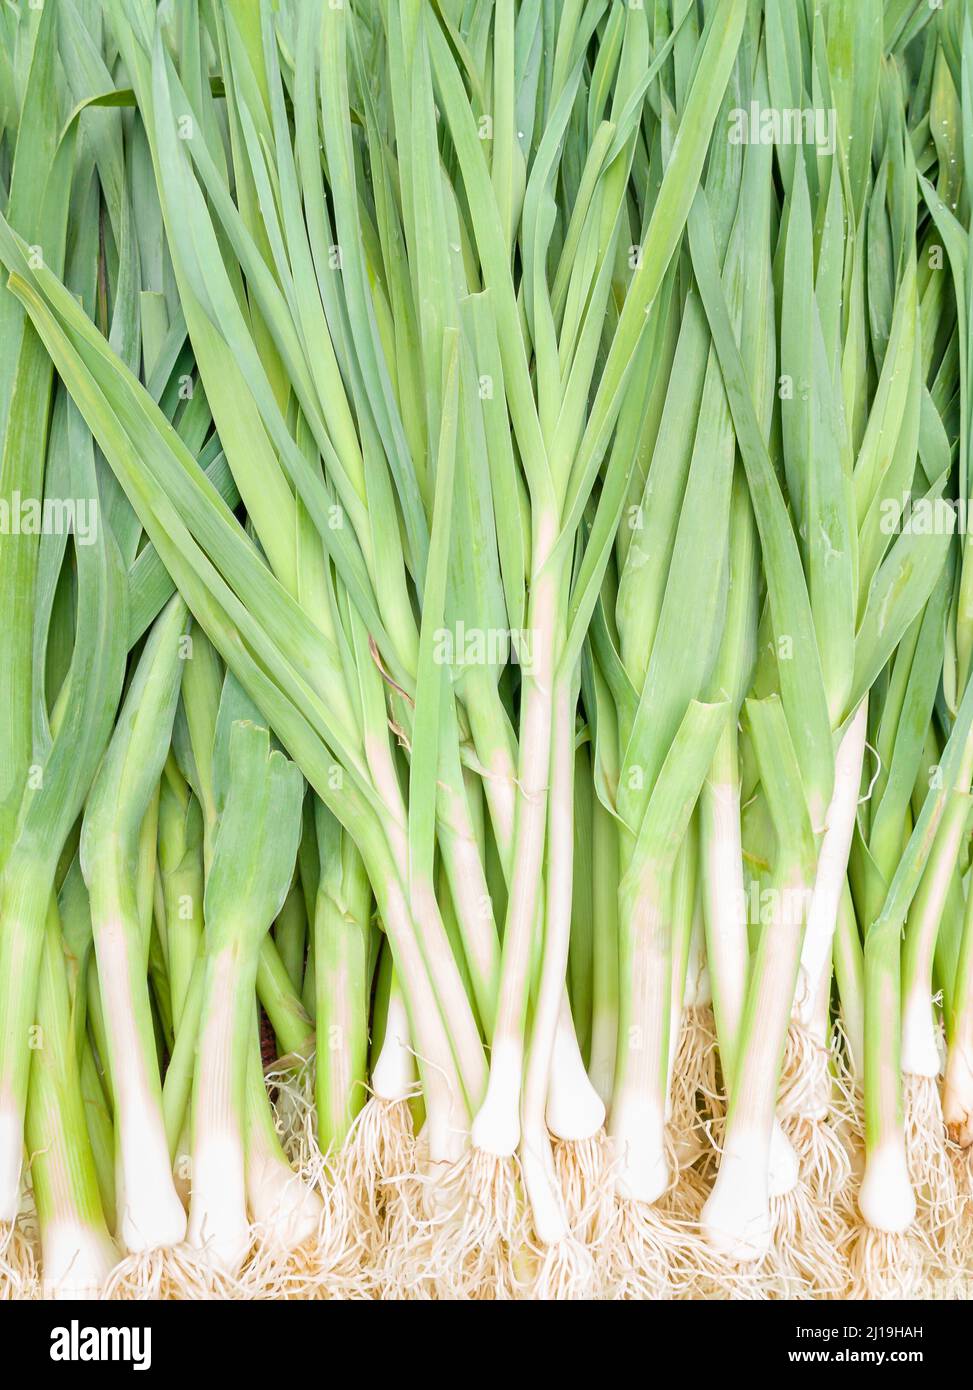 leaks, freshly harvested raw vegetable background, taken from above in shallow depth of field Stock Photo